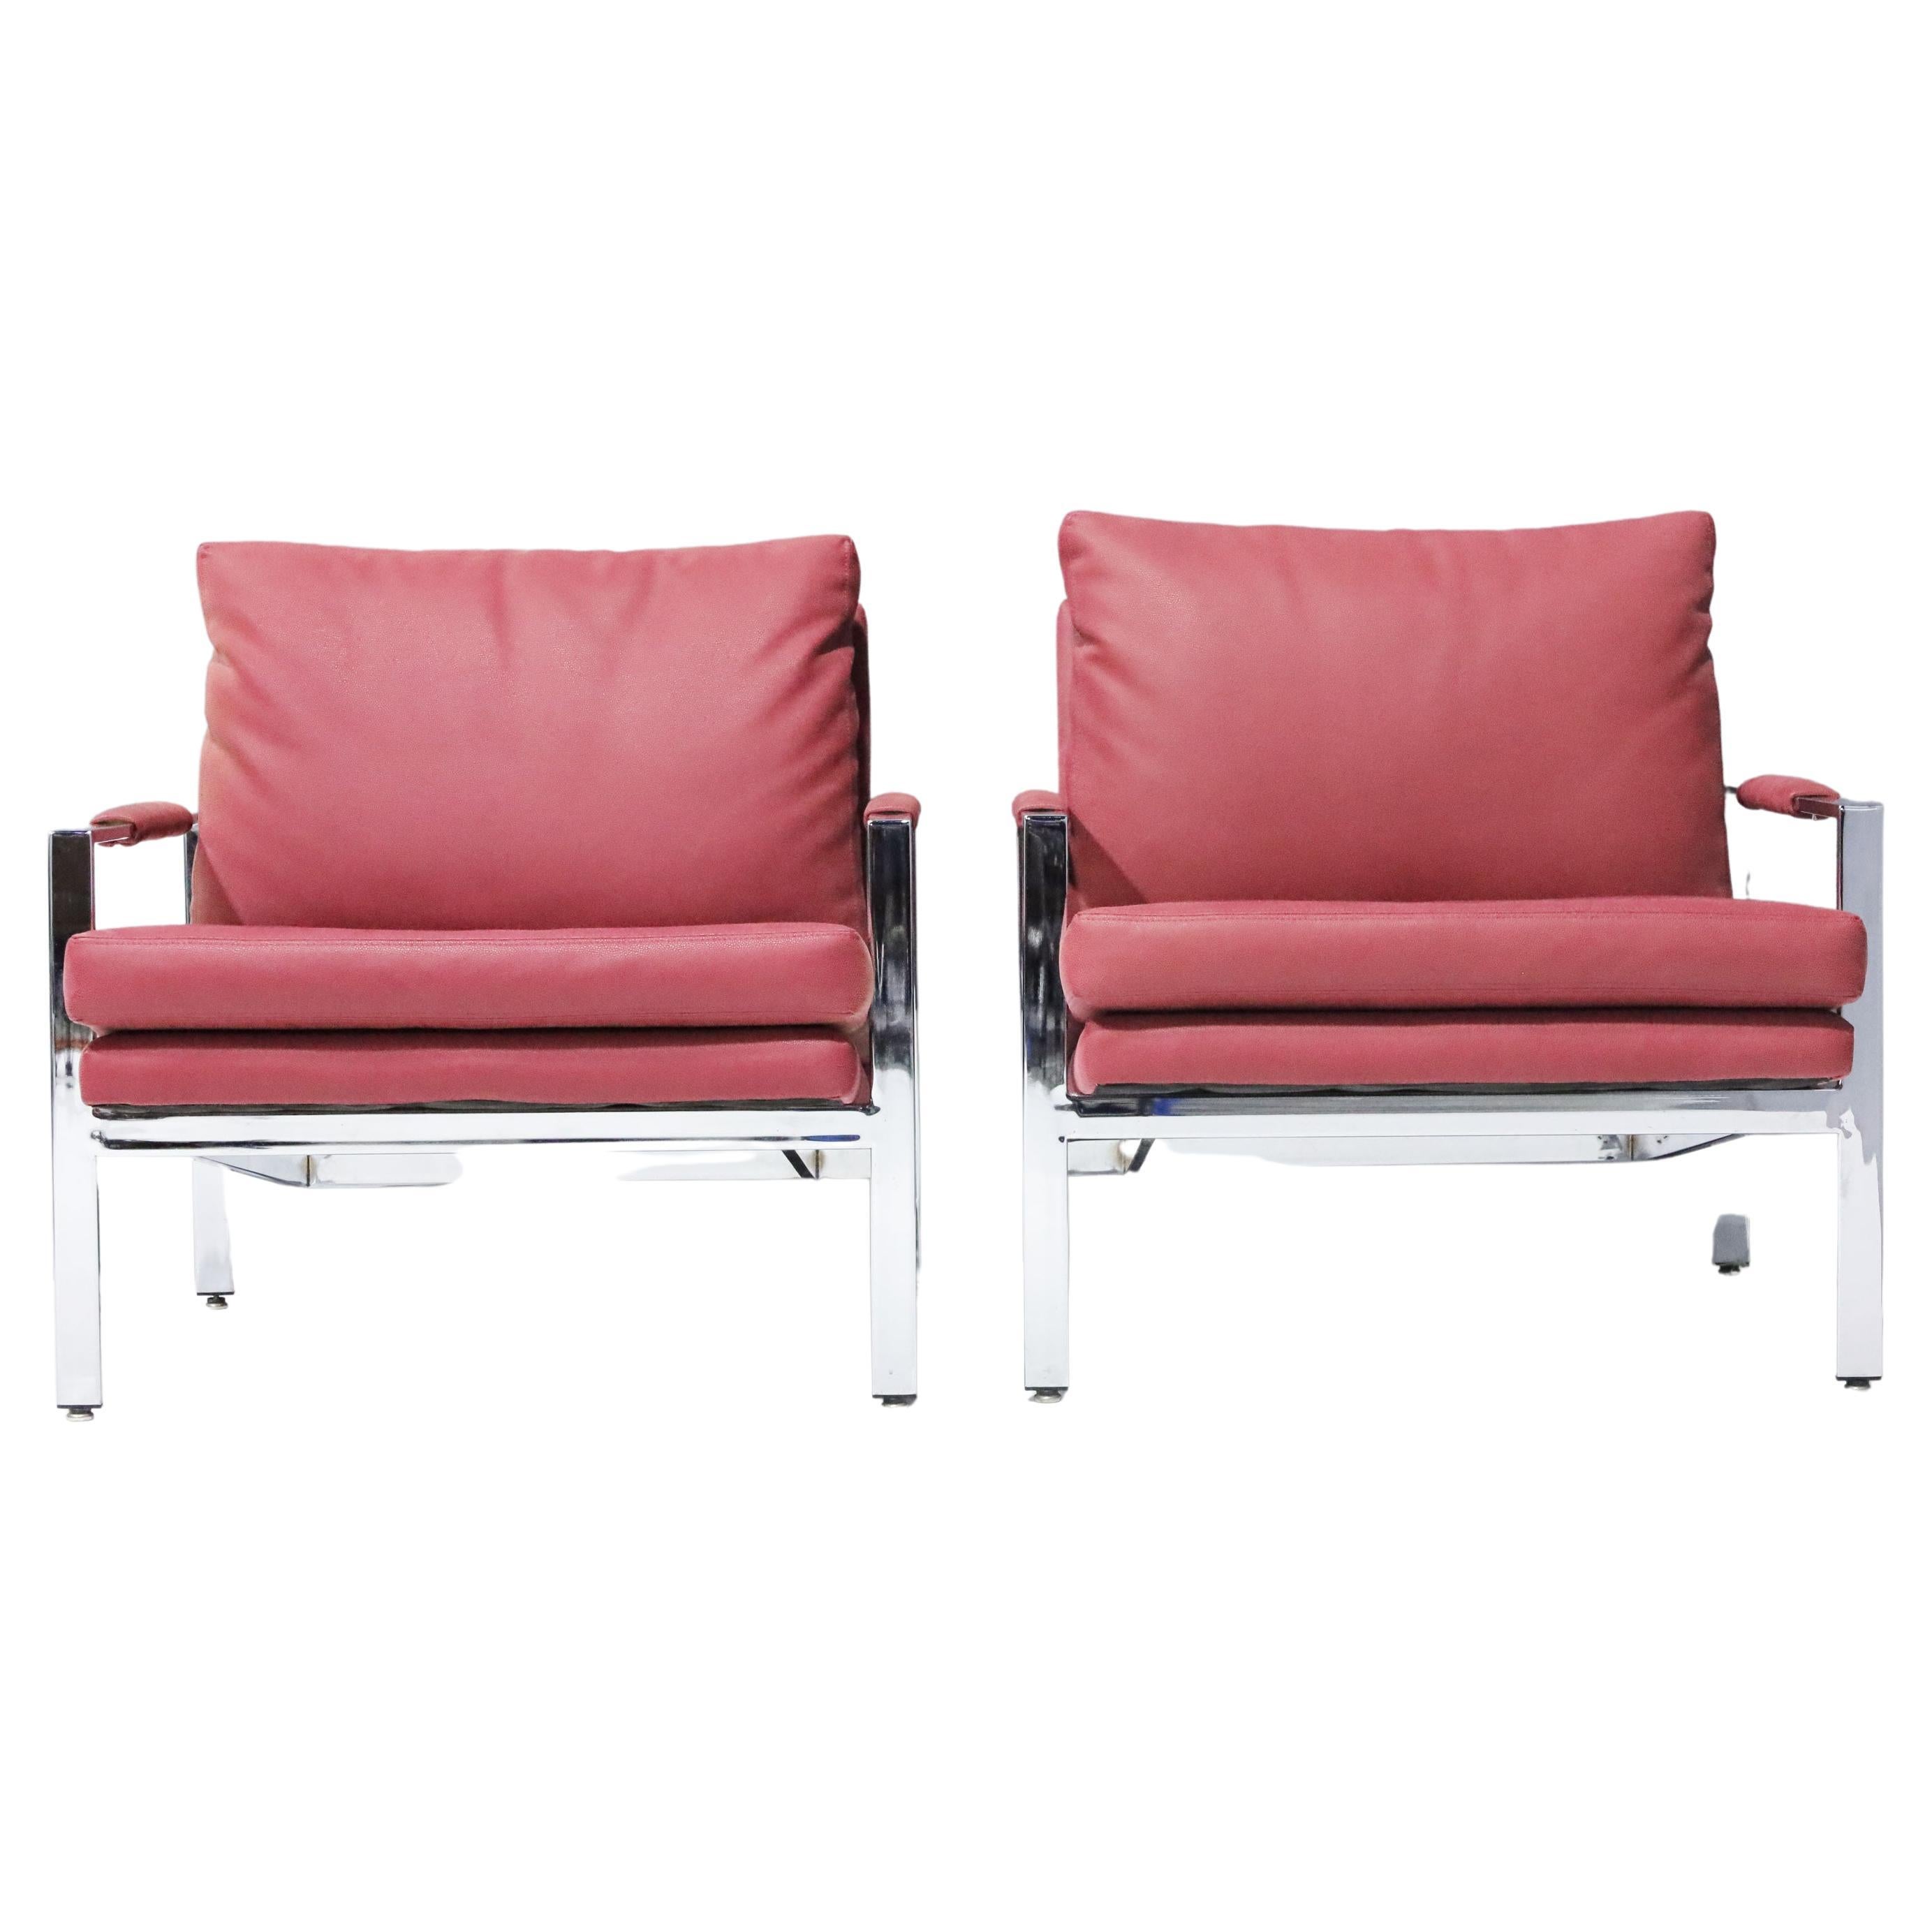 Milo Baughman Chrome Frame Lounge Chairs in Dusty Rose Faux Suede/Leather For Sale